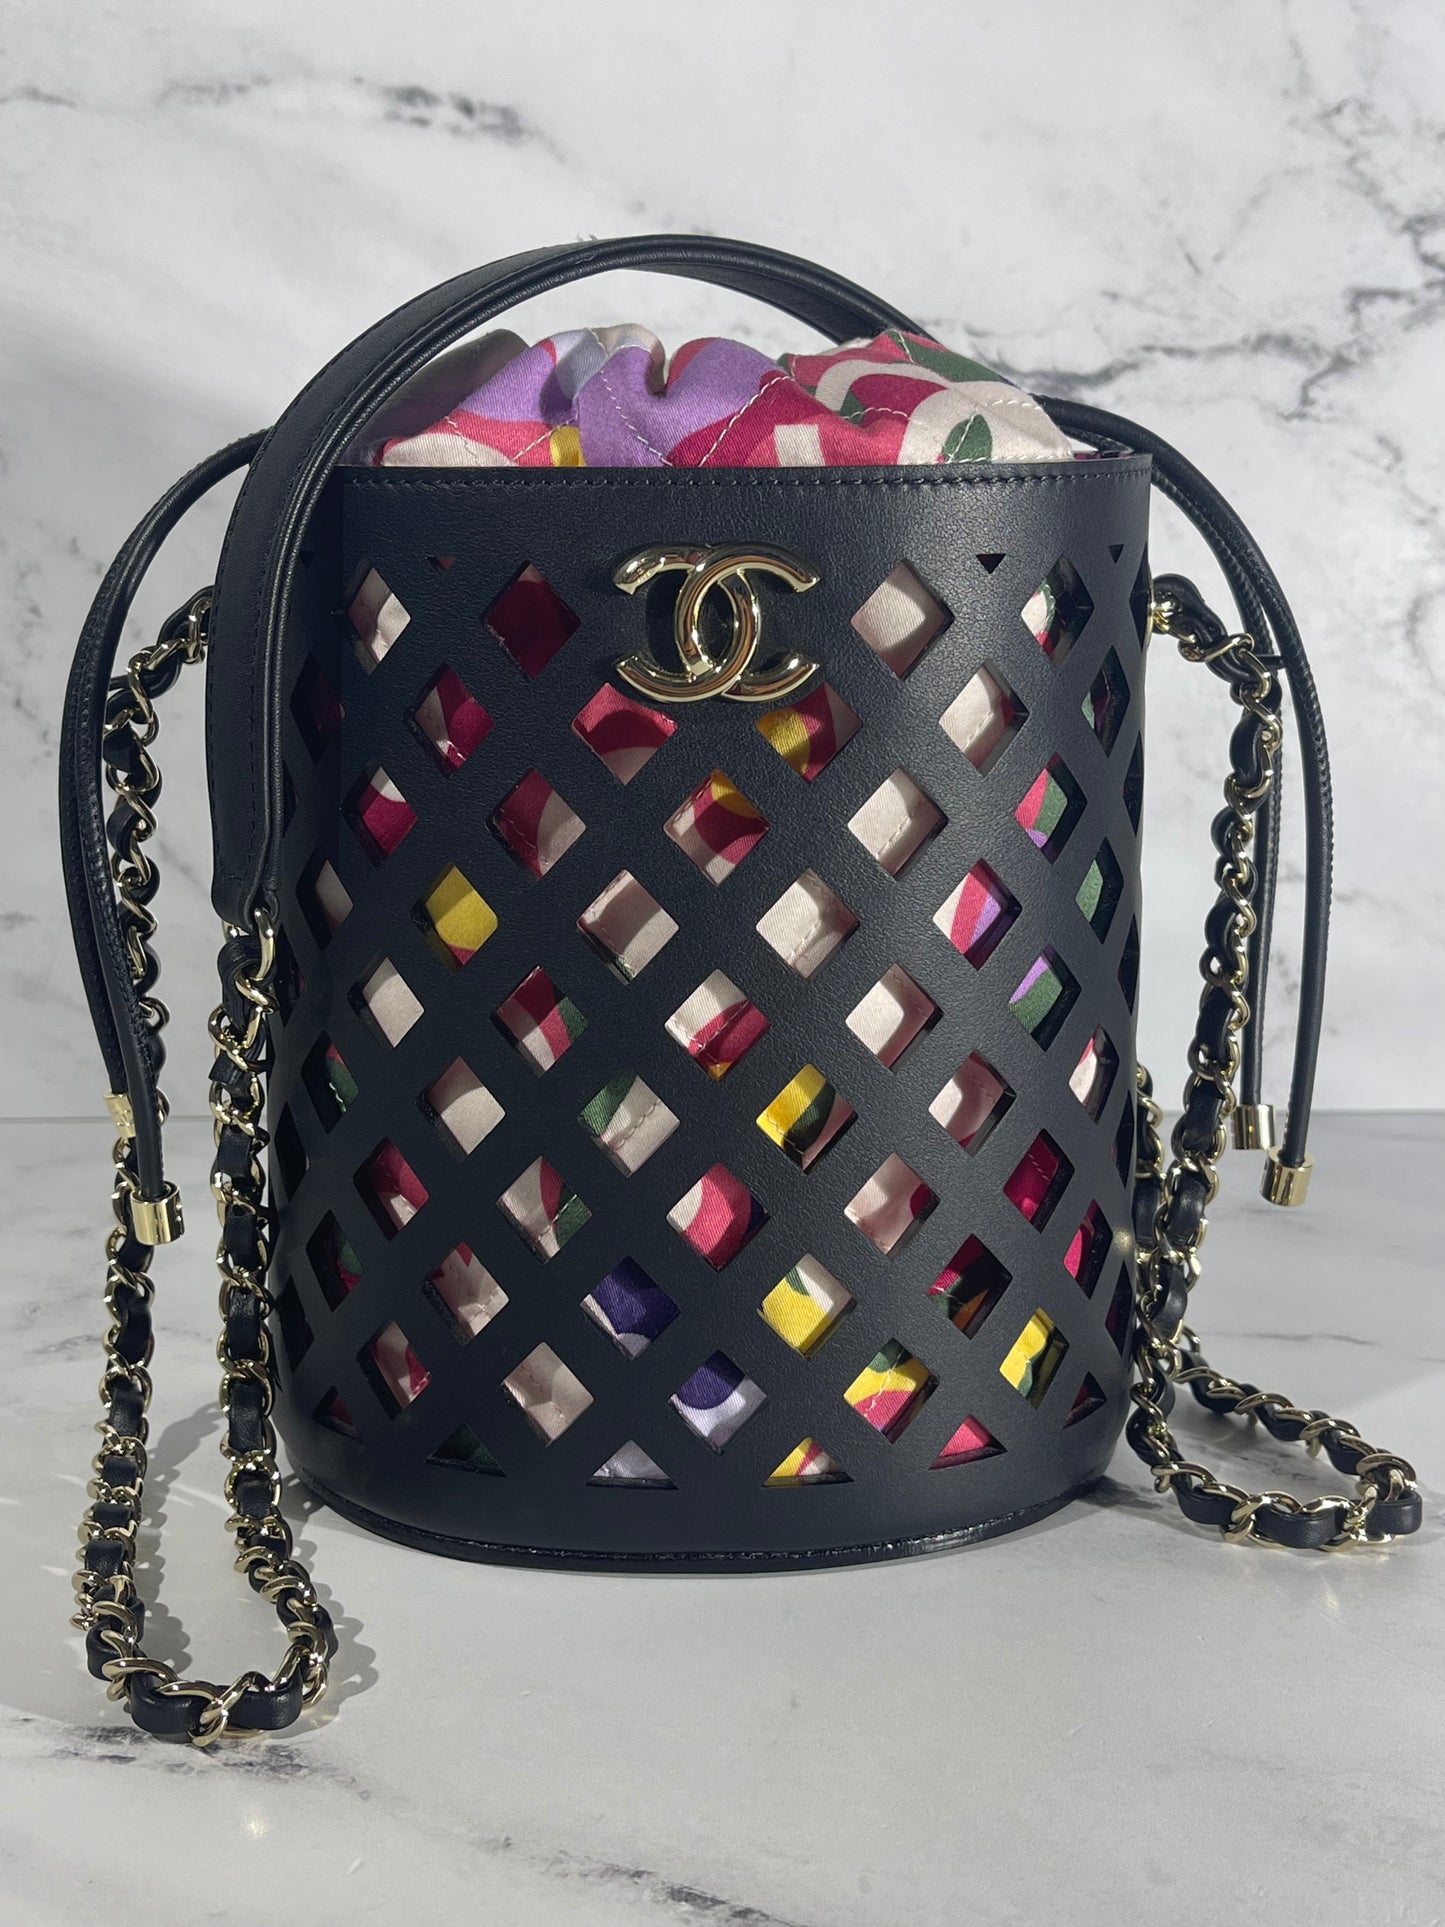 Chanel Black See Through Perforated Leather Bucket Bag w Quilted Drawstring Pouch & LGHW